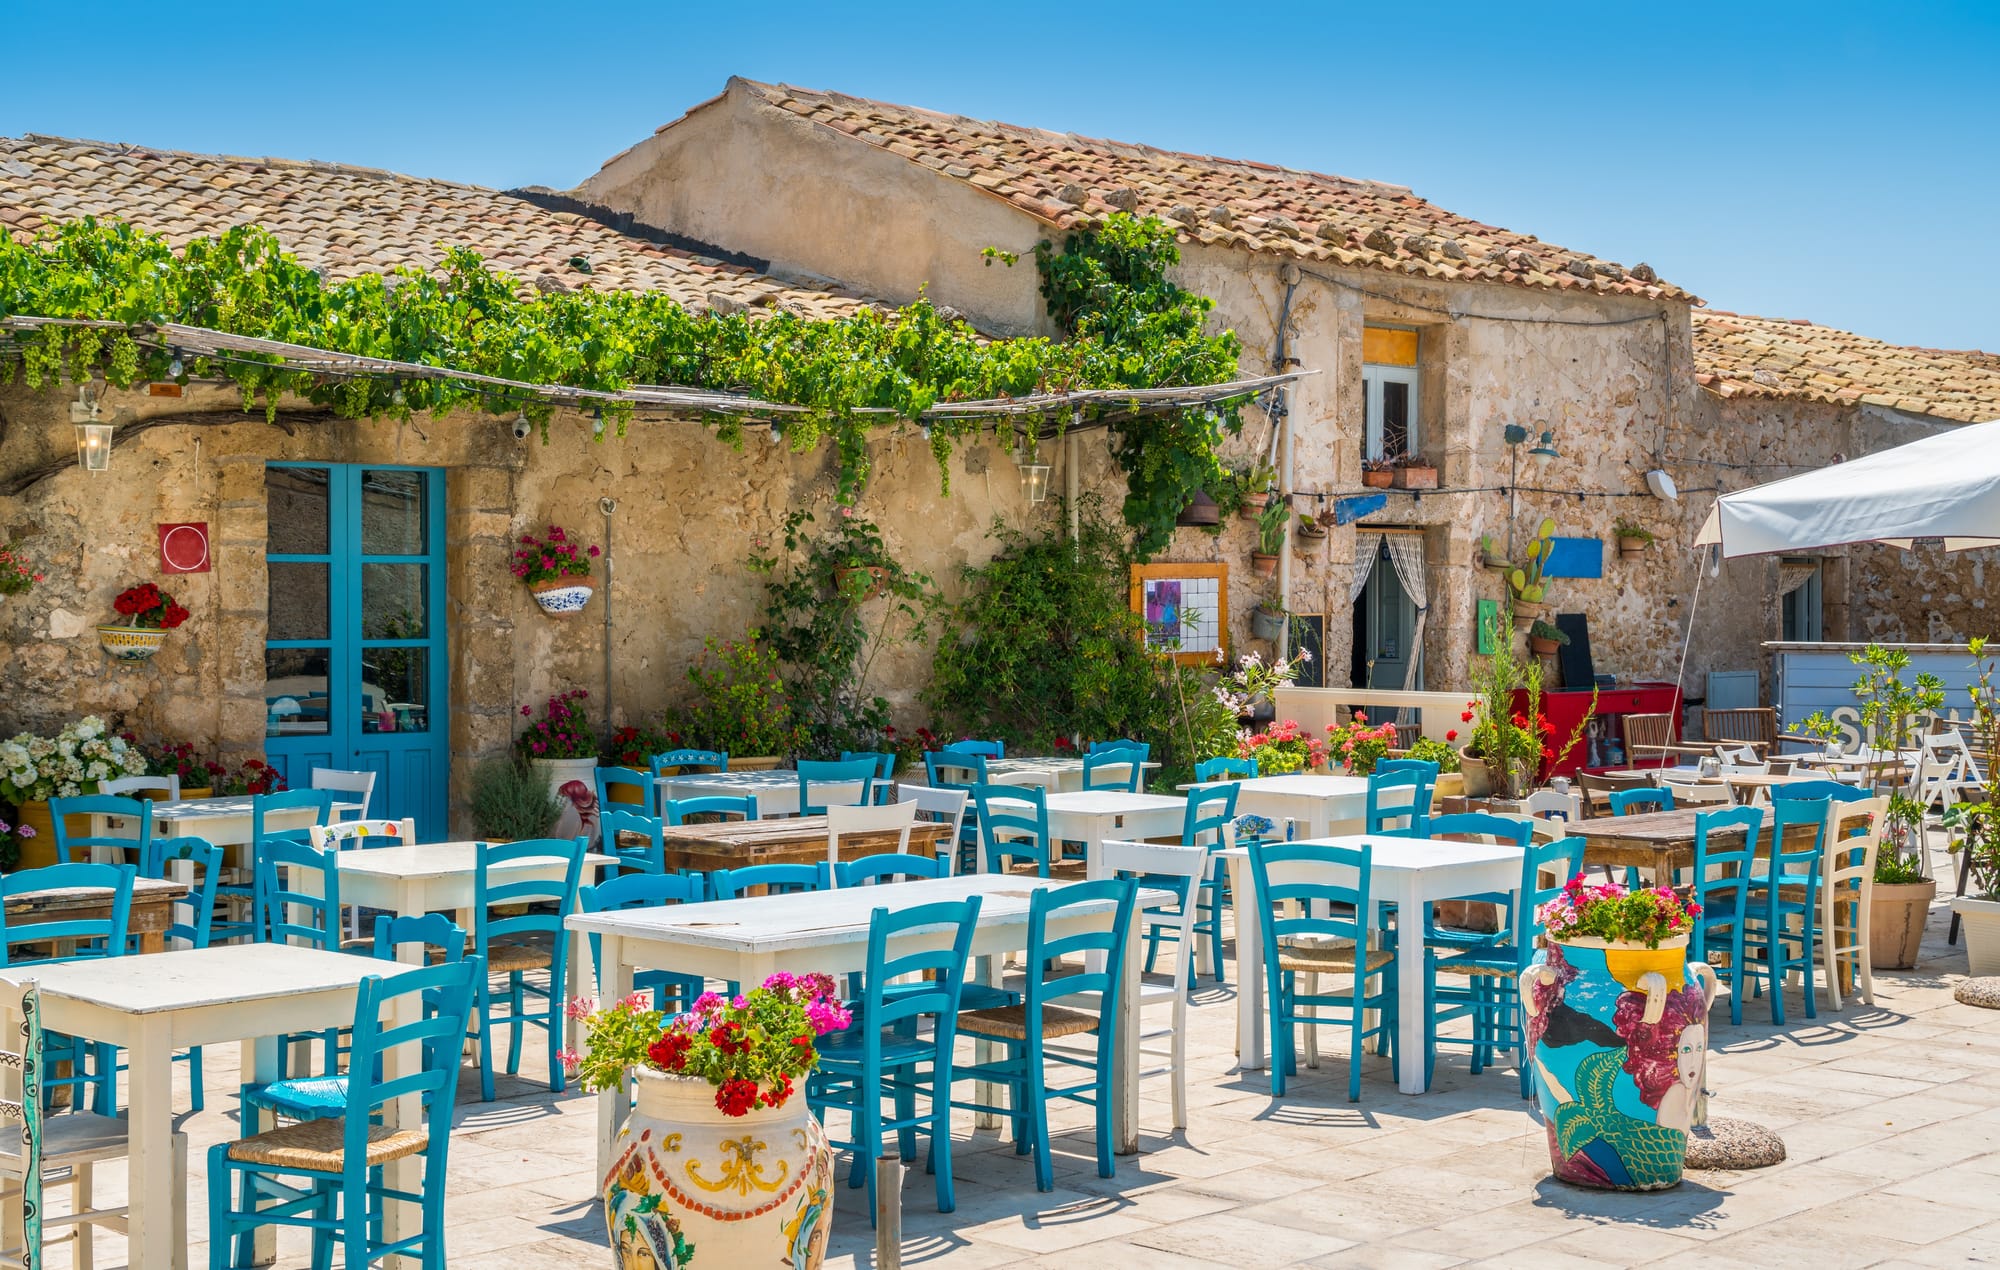 Best Places To Visit In Europe In Spring (Pictured - Marzamemi, Sicily)